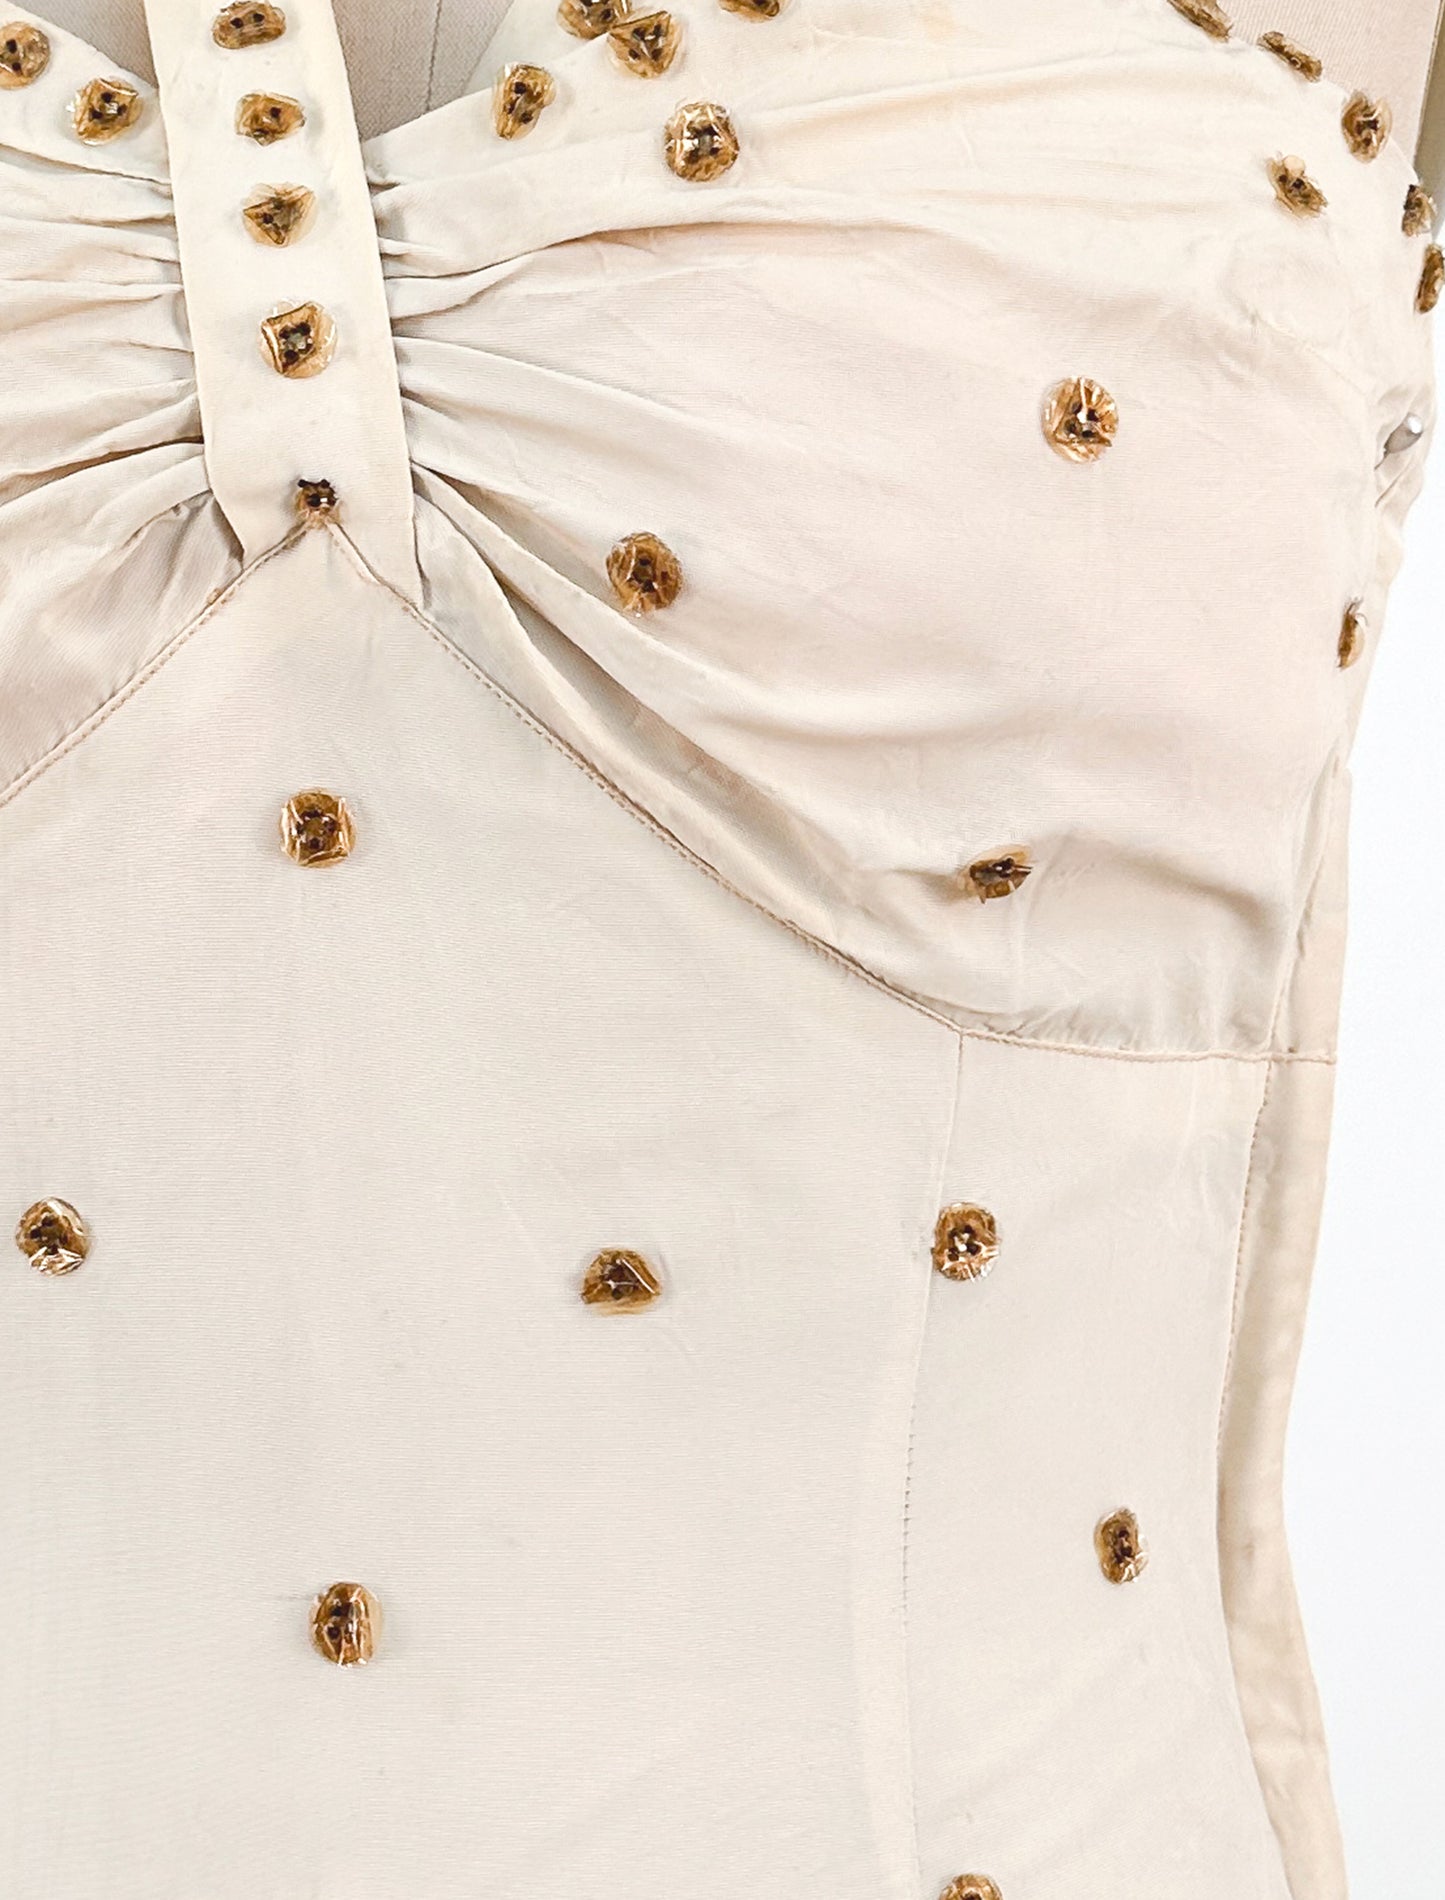 1940s Cream 'Old Hollywood' Dress with Bronze Sequins / Waist 26-28